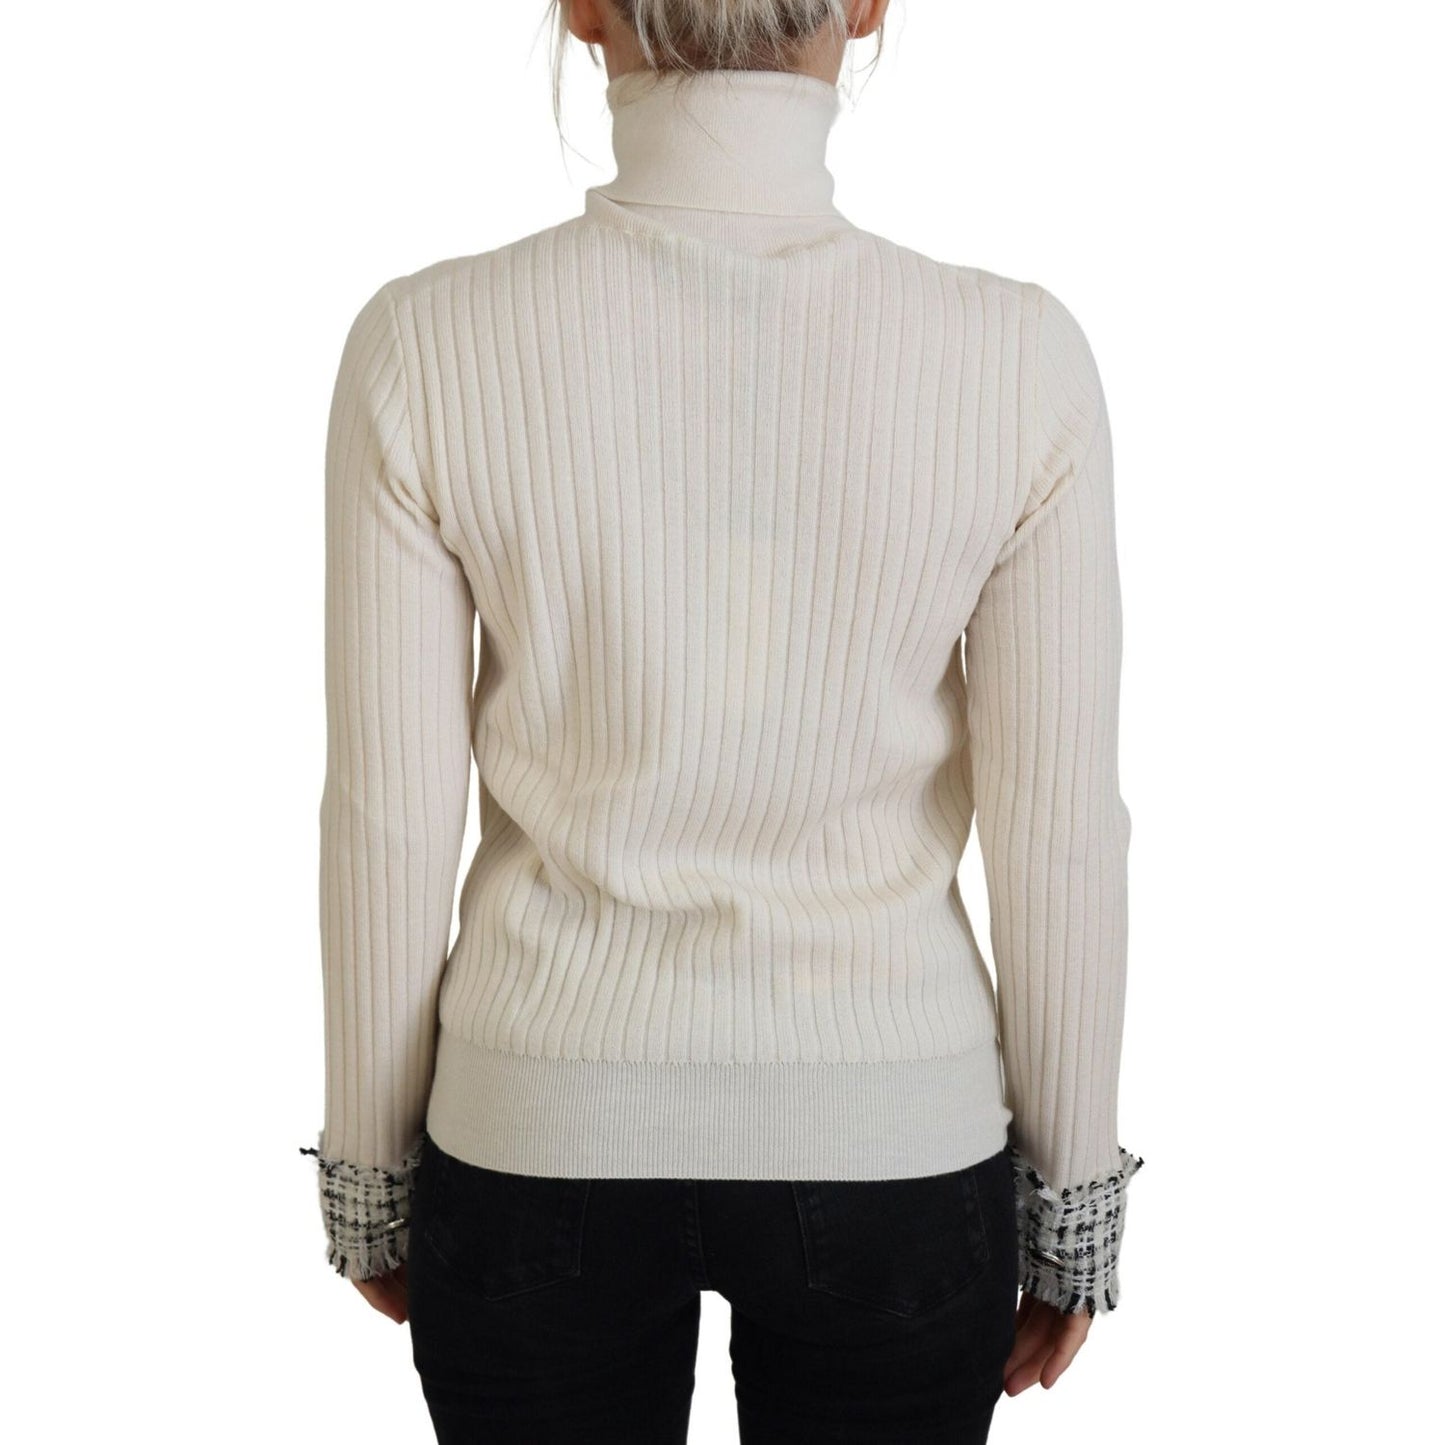 Dolce & Gabbana Ivory Turtleneck Wool Blend Sweater ivory-turtleneck-distressed-cuff-pullover-sweater